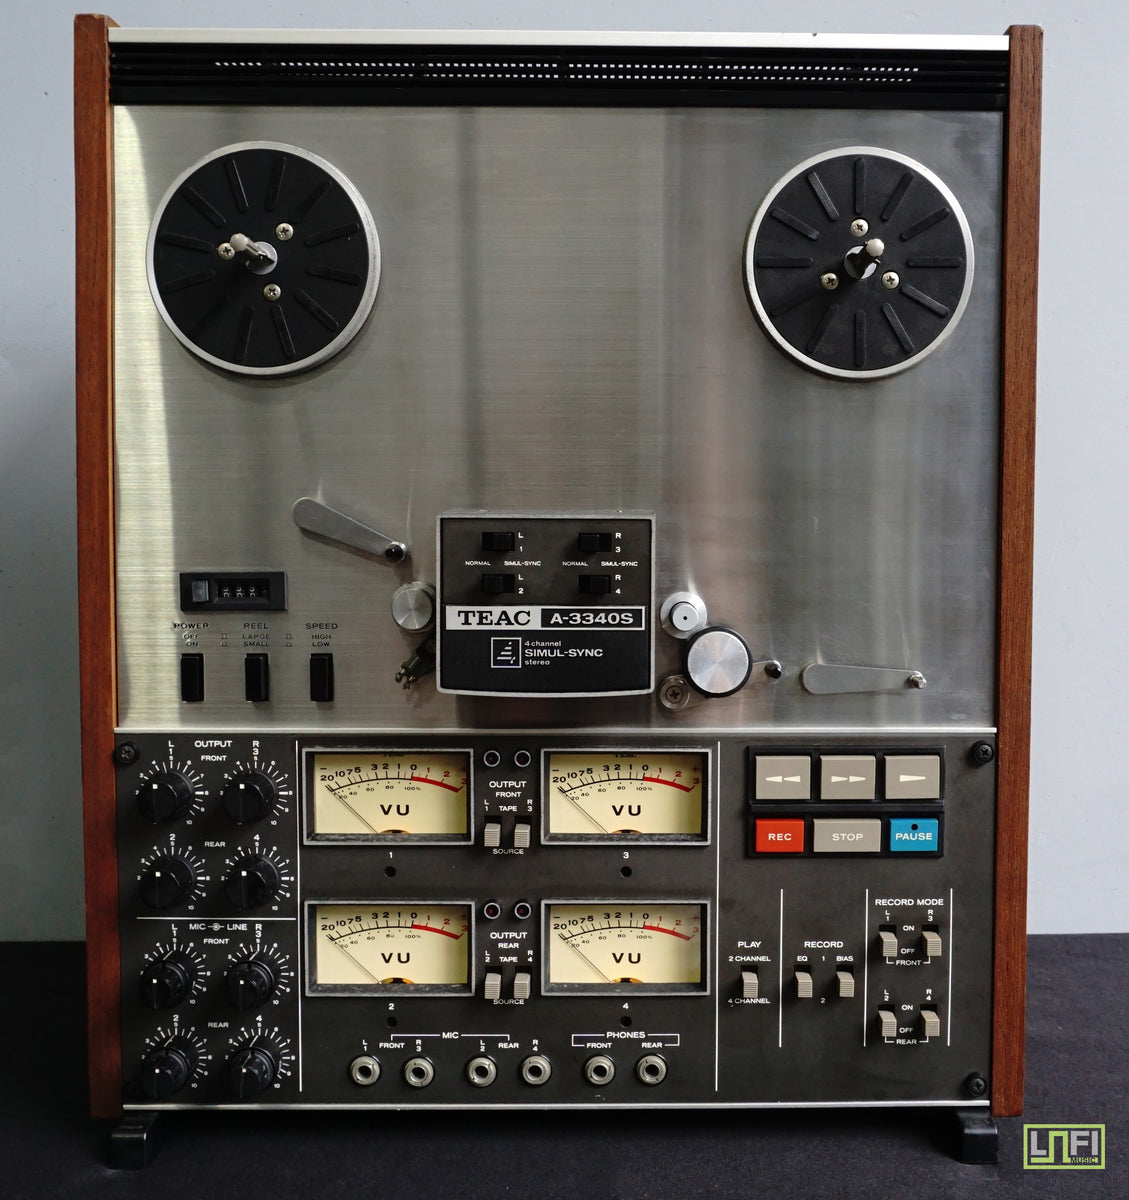 Teac A-3340S 4 Track Vintage Analogue Reel To Reel Tape